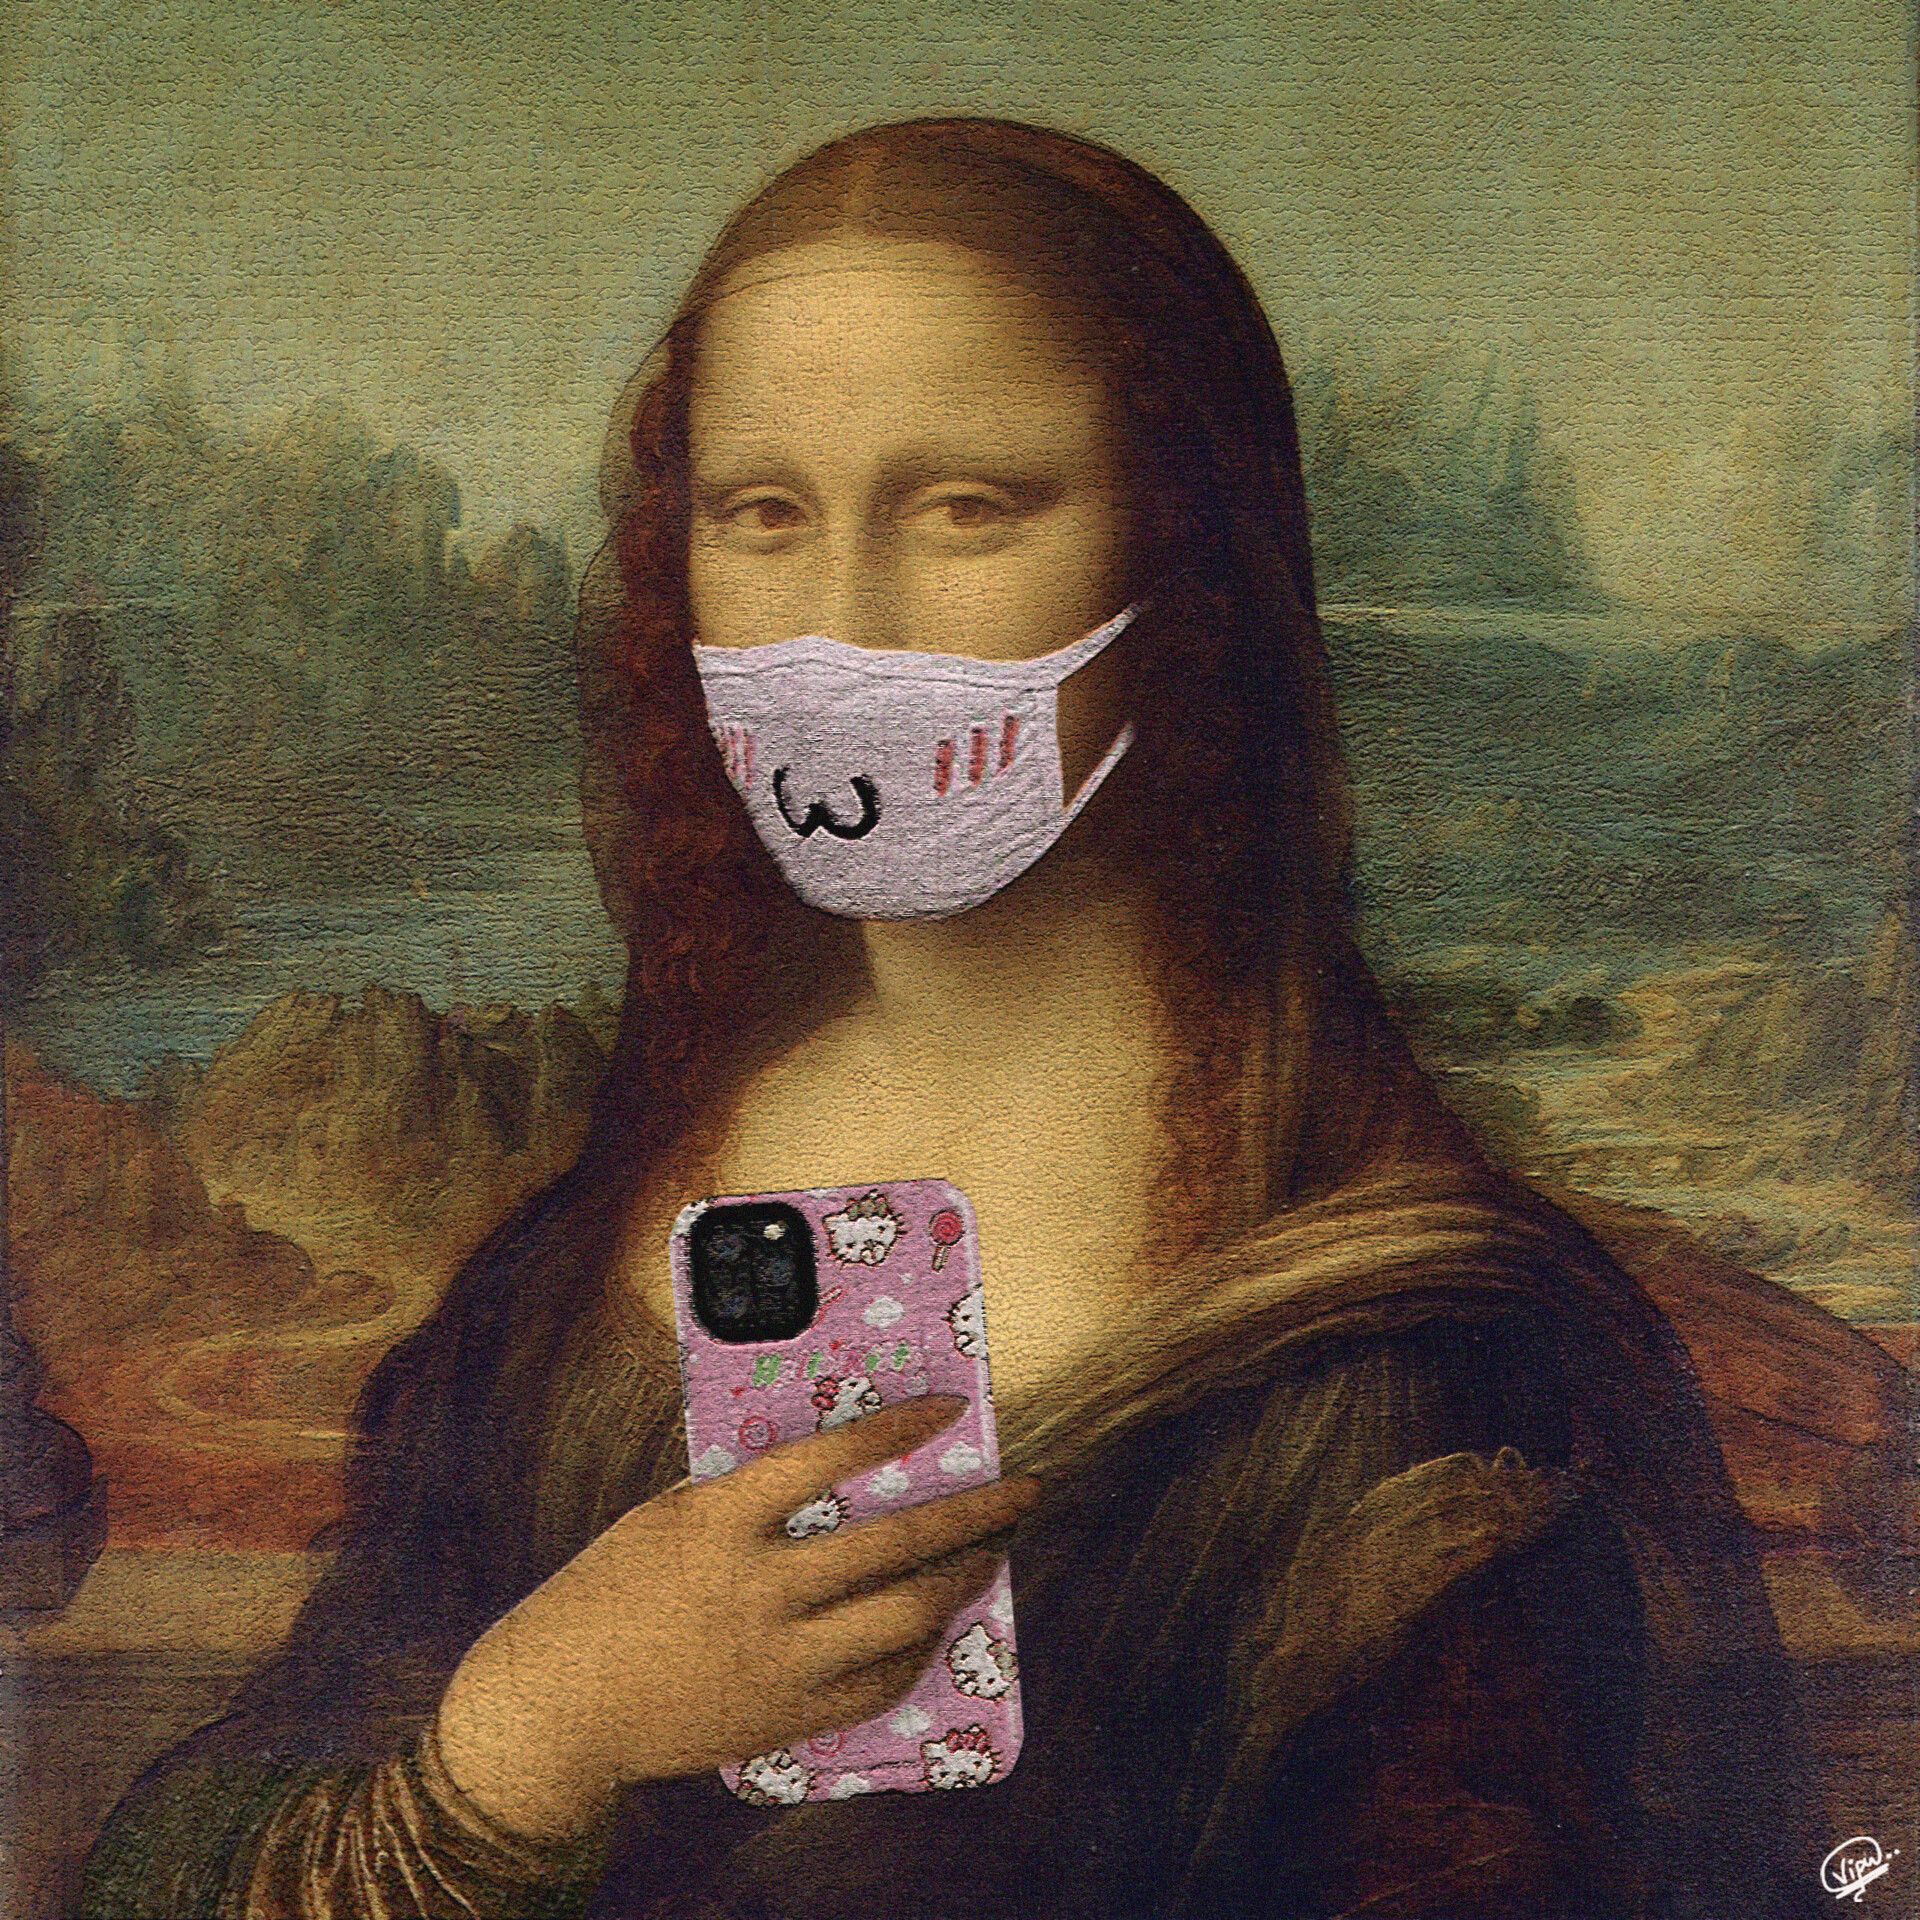 Mona Lisa wearing a mask and holding a phone with a kitten case - Mona Lisa